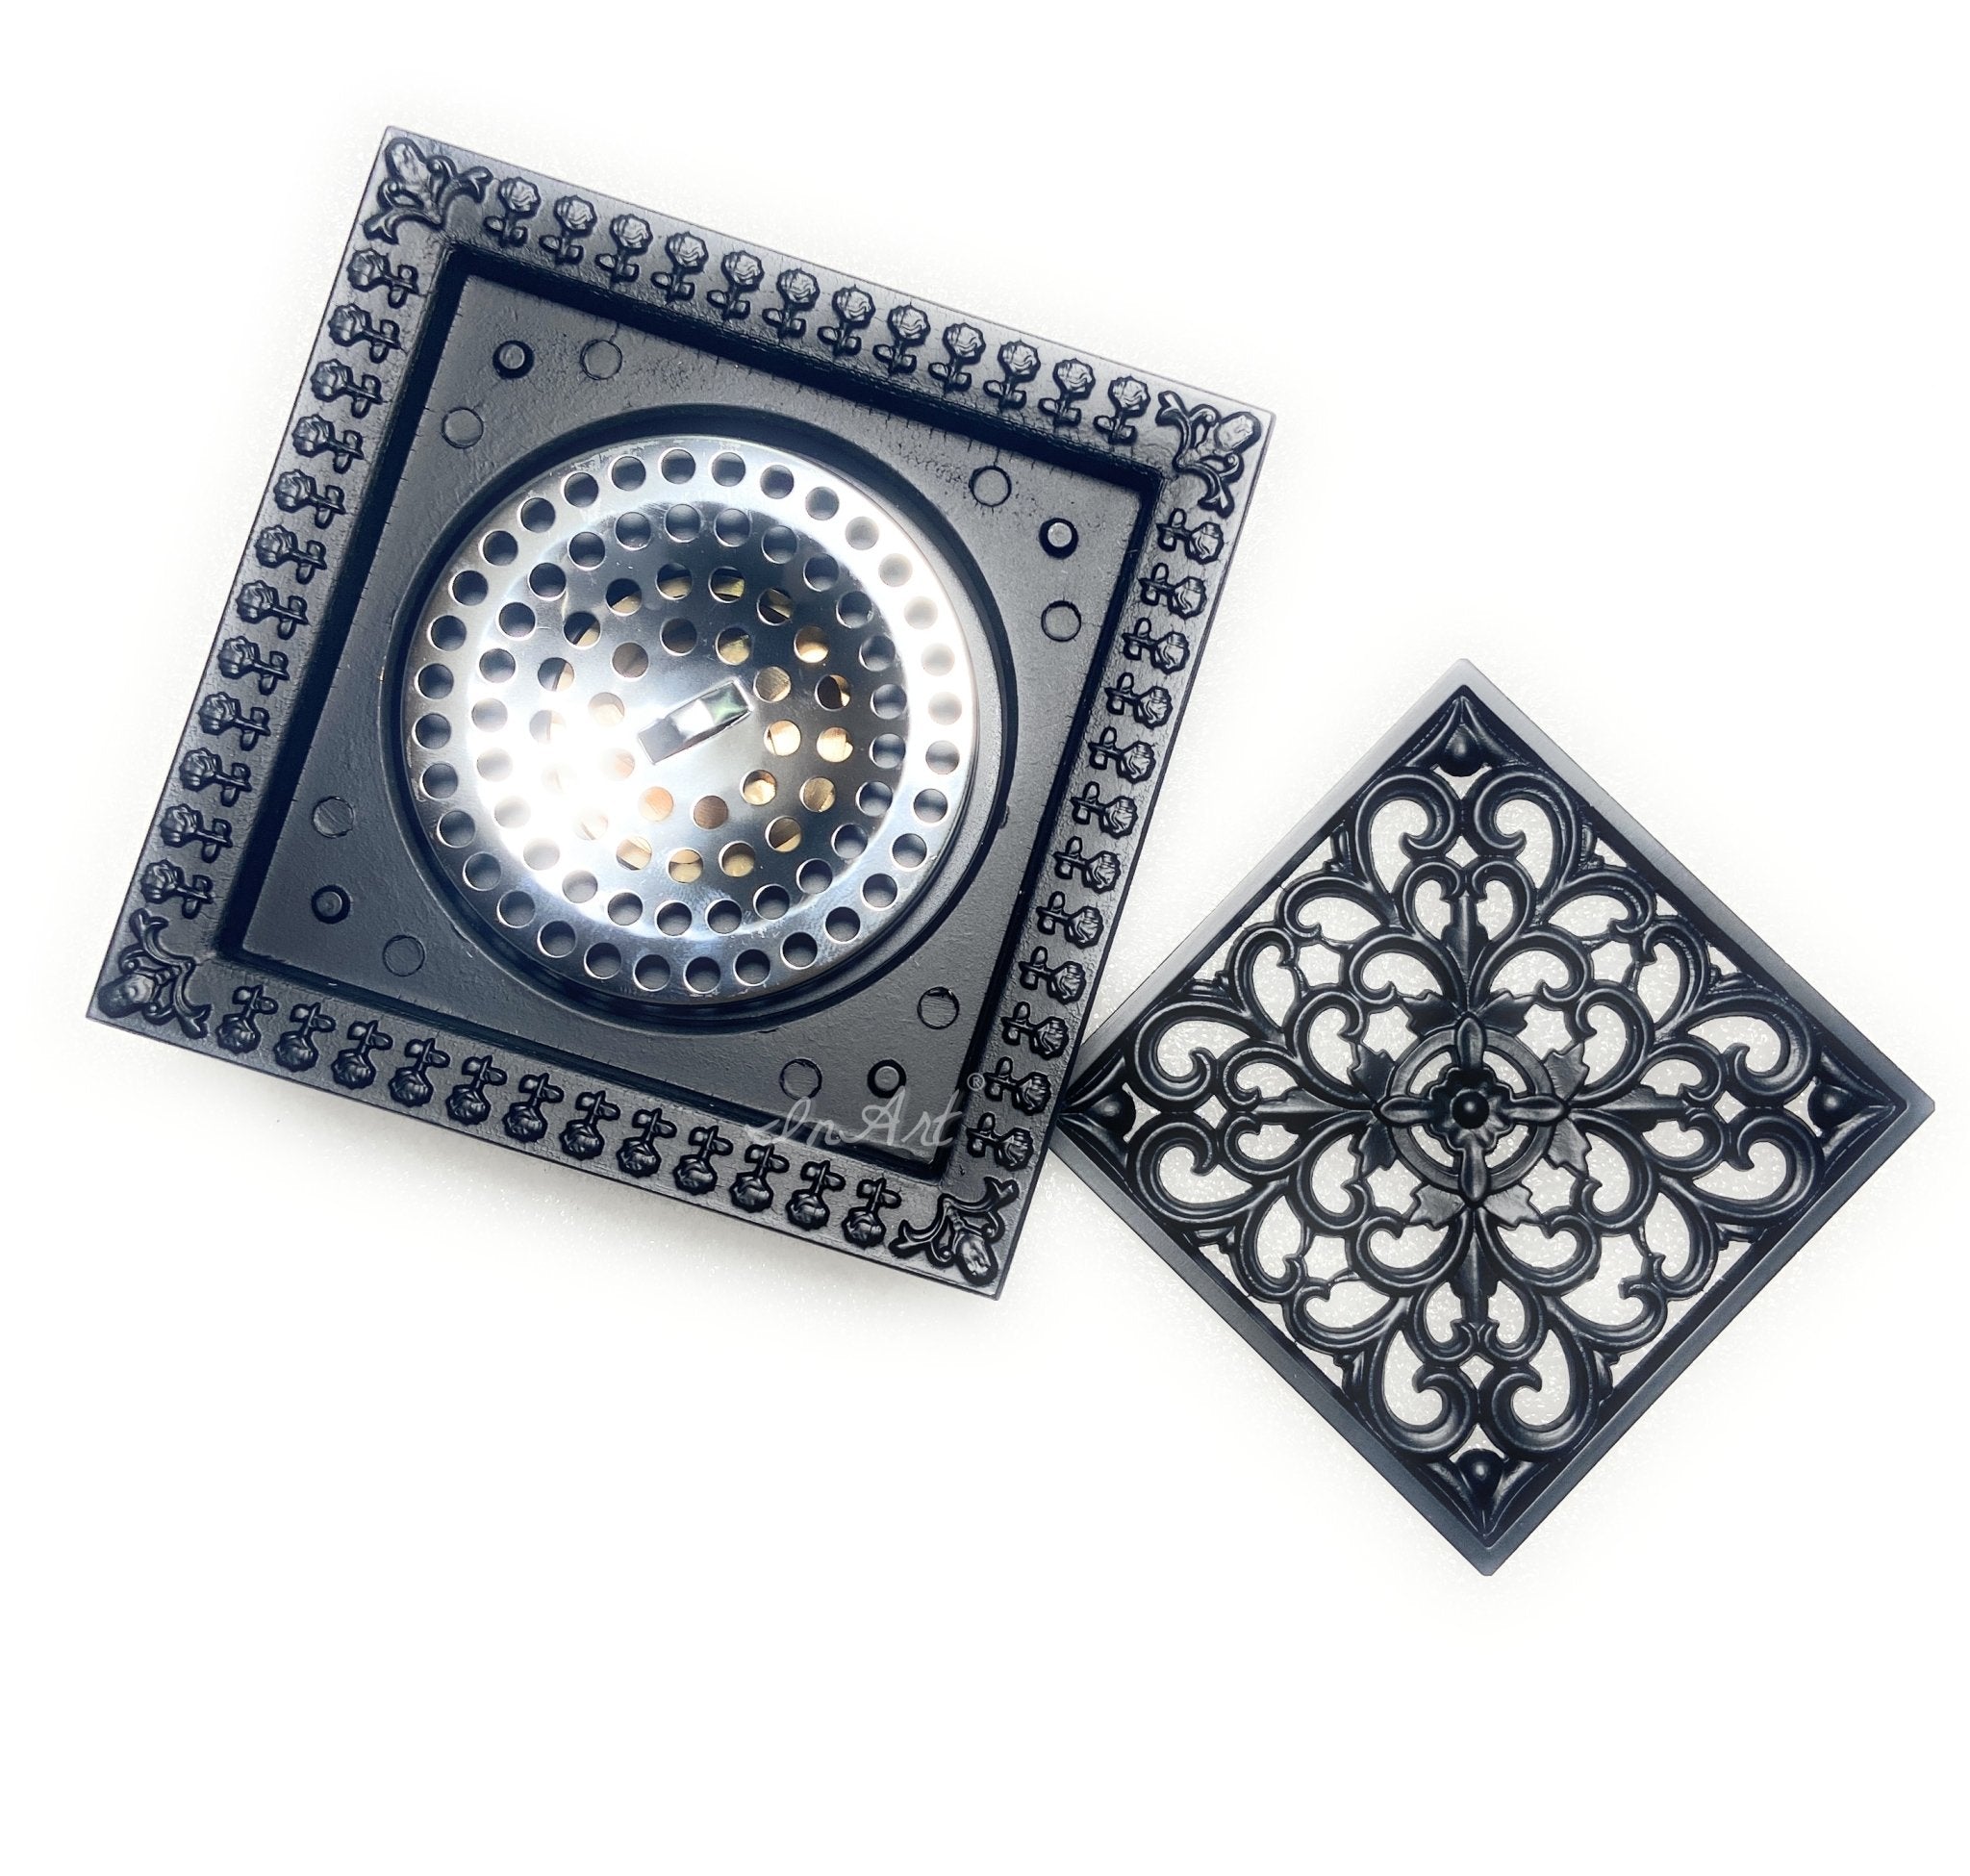 https://inart-in.com/cdn/shop/products/inart-brass-square-shower-floor-drain-with-removable-cover-grid-grate-5-inch-long-black-matt-color-floral-inart-studio-usa-692429_2048x2048.jpg?v=1663697021